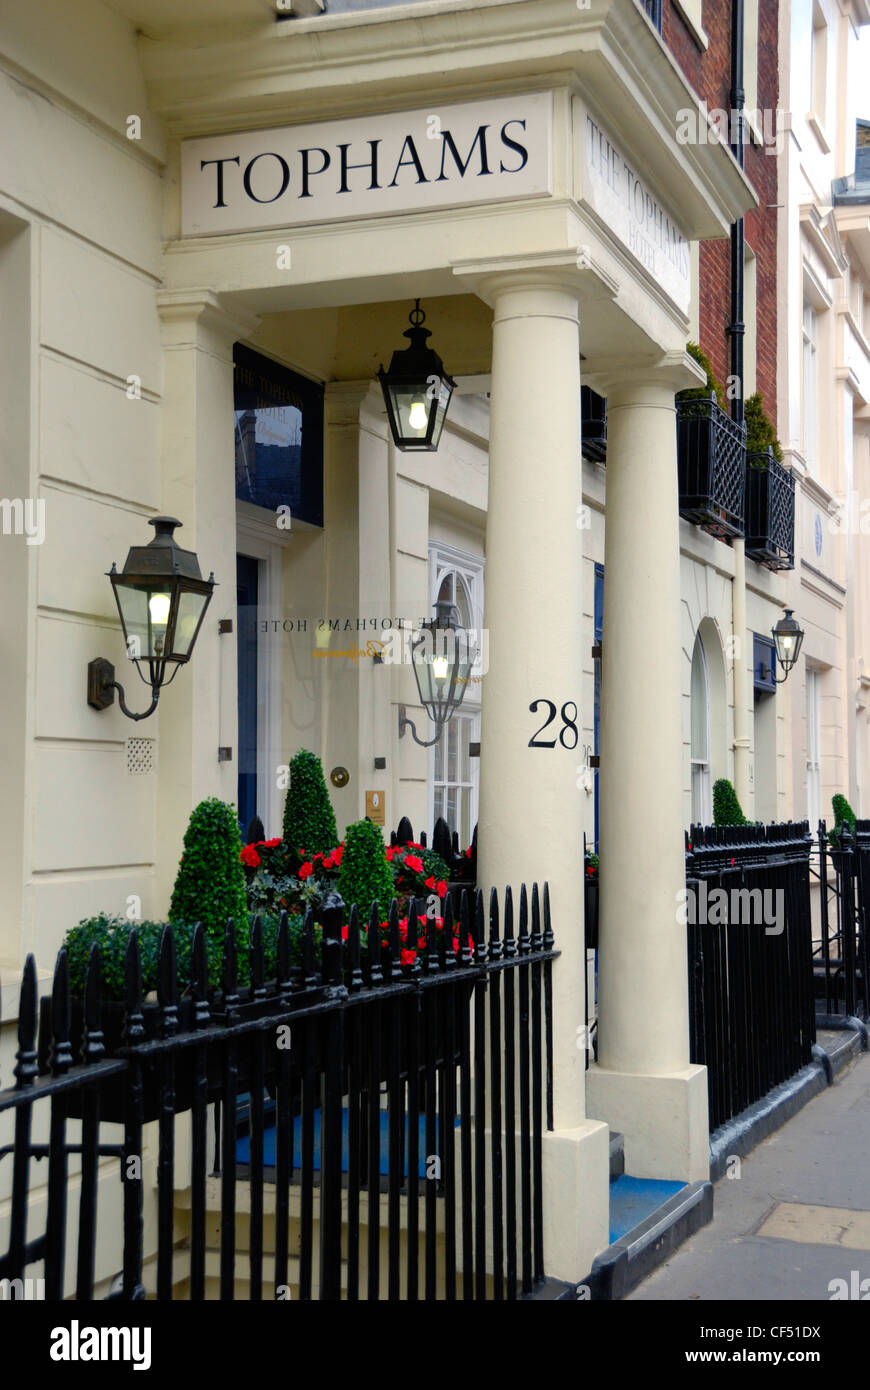 Tophams Hotel, a luxury boutique London hotel in Ebury Street. Stock Photo